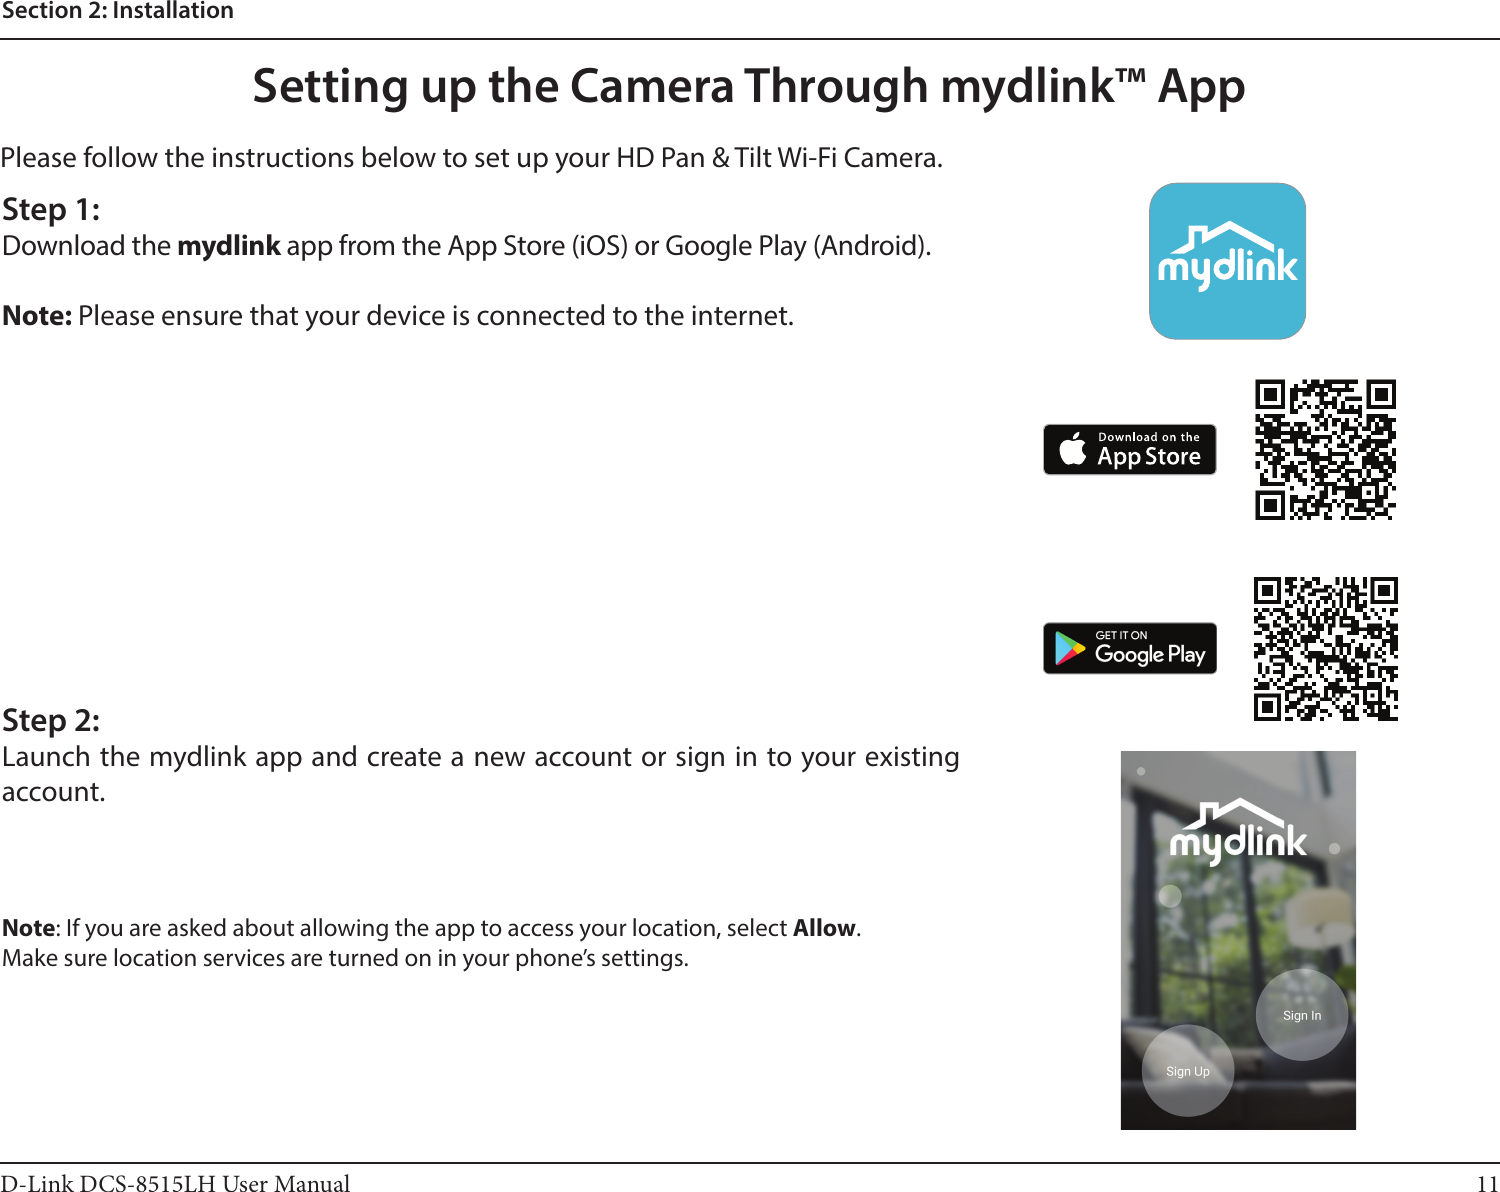 11D-Link DCS-8515LH User ManualSection 2: InstallationPlease follow the instructions below to set up your HD Pan &amp; Tilt Wi-Fi Camera.Setting up the Camera Through mydlink™ AppStep 1:Download the mydlink app from the App Store (iOS) or Google Play (Android).Note: Please ensure that your device is connected to the internet.Step 2:Launch the mydlink app and create a new account or sign in to your existing account.Note: If you are asked about allowing the app to access your location, select Allow.Make sure location services are turned on in your phone’s settings.